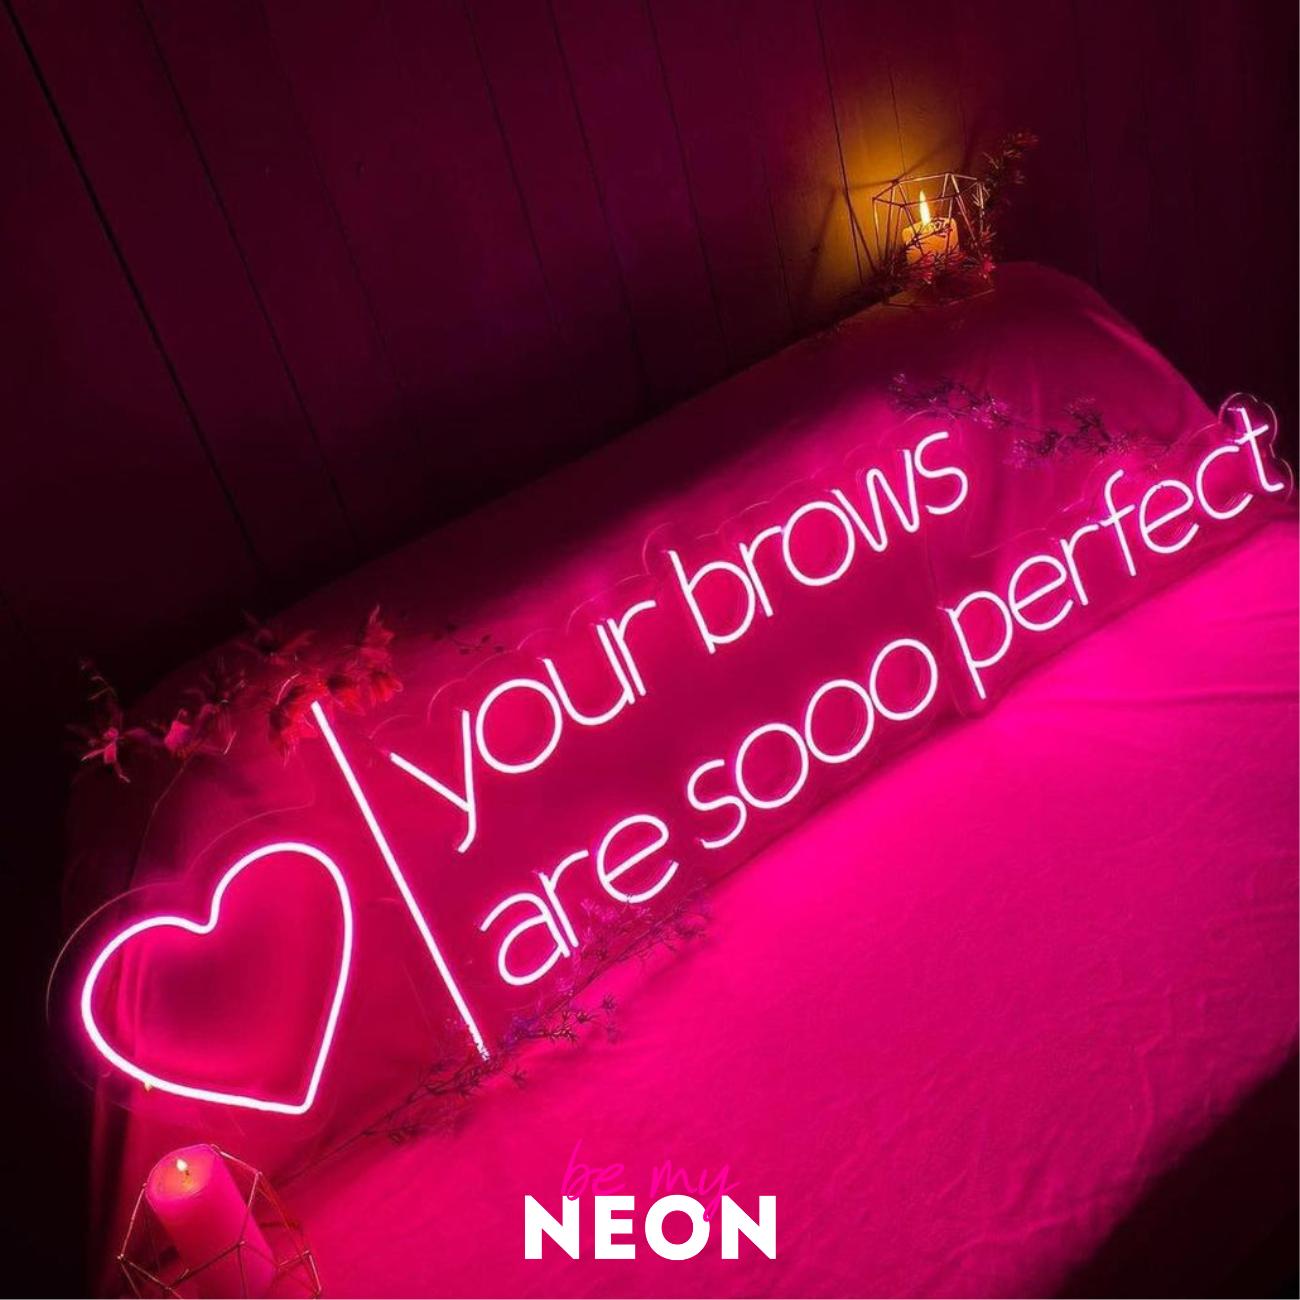 "your browns are sooo perfect" LED Neonschild